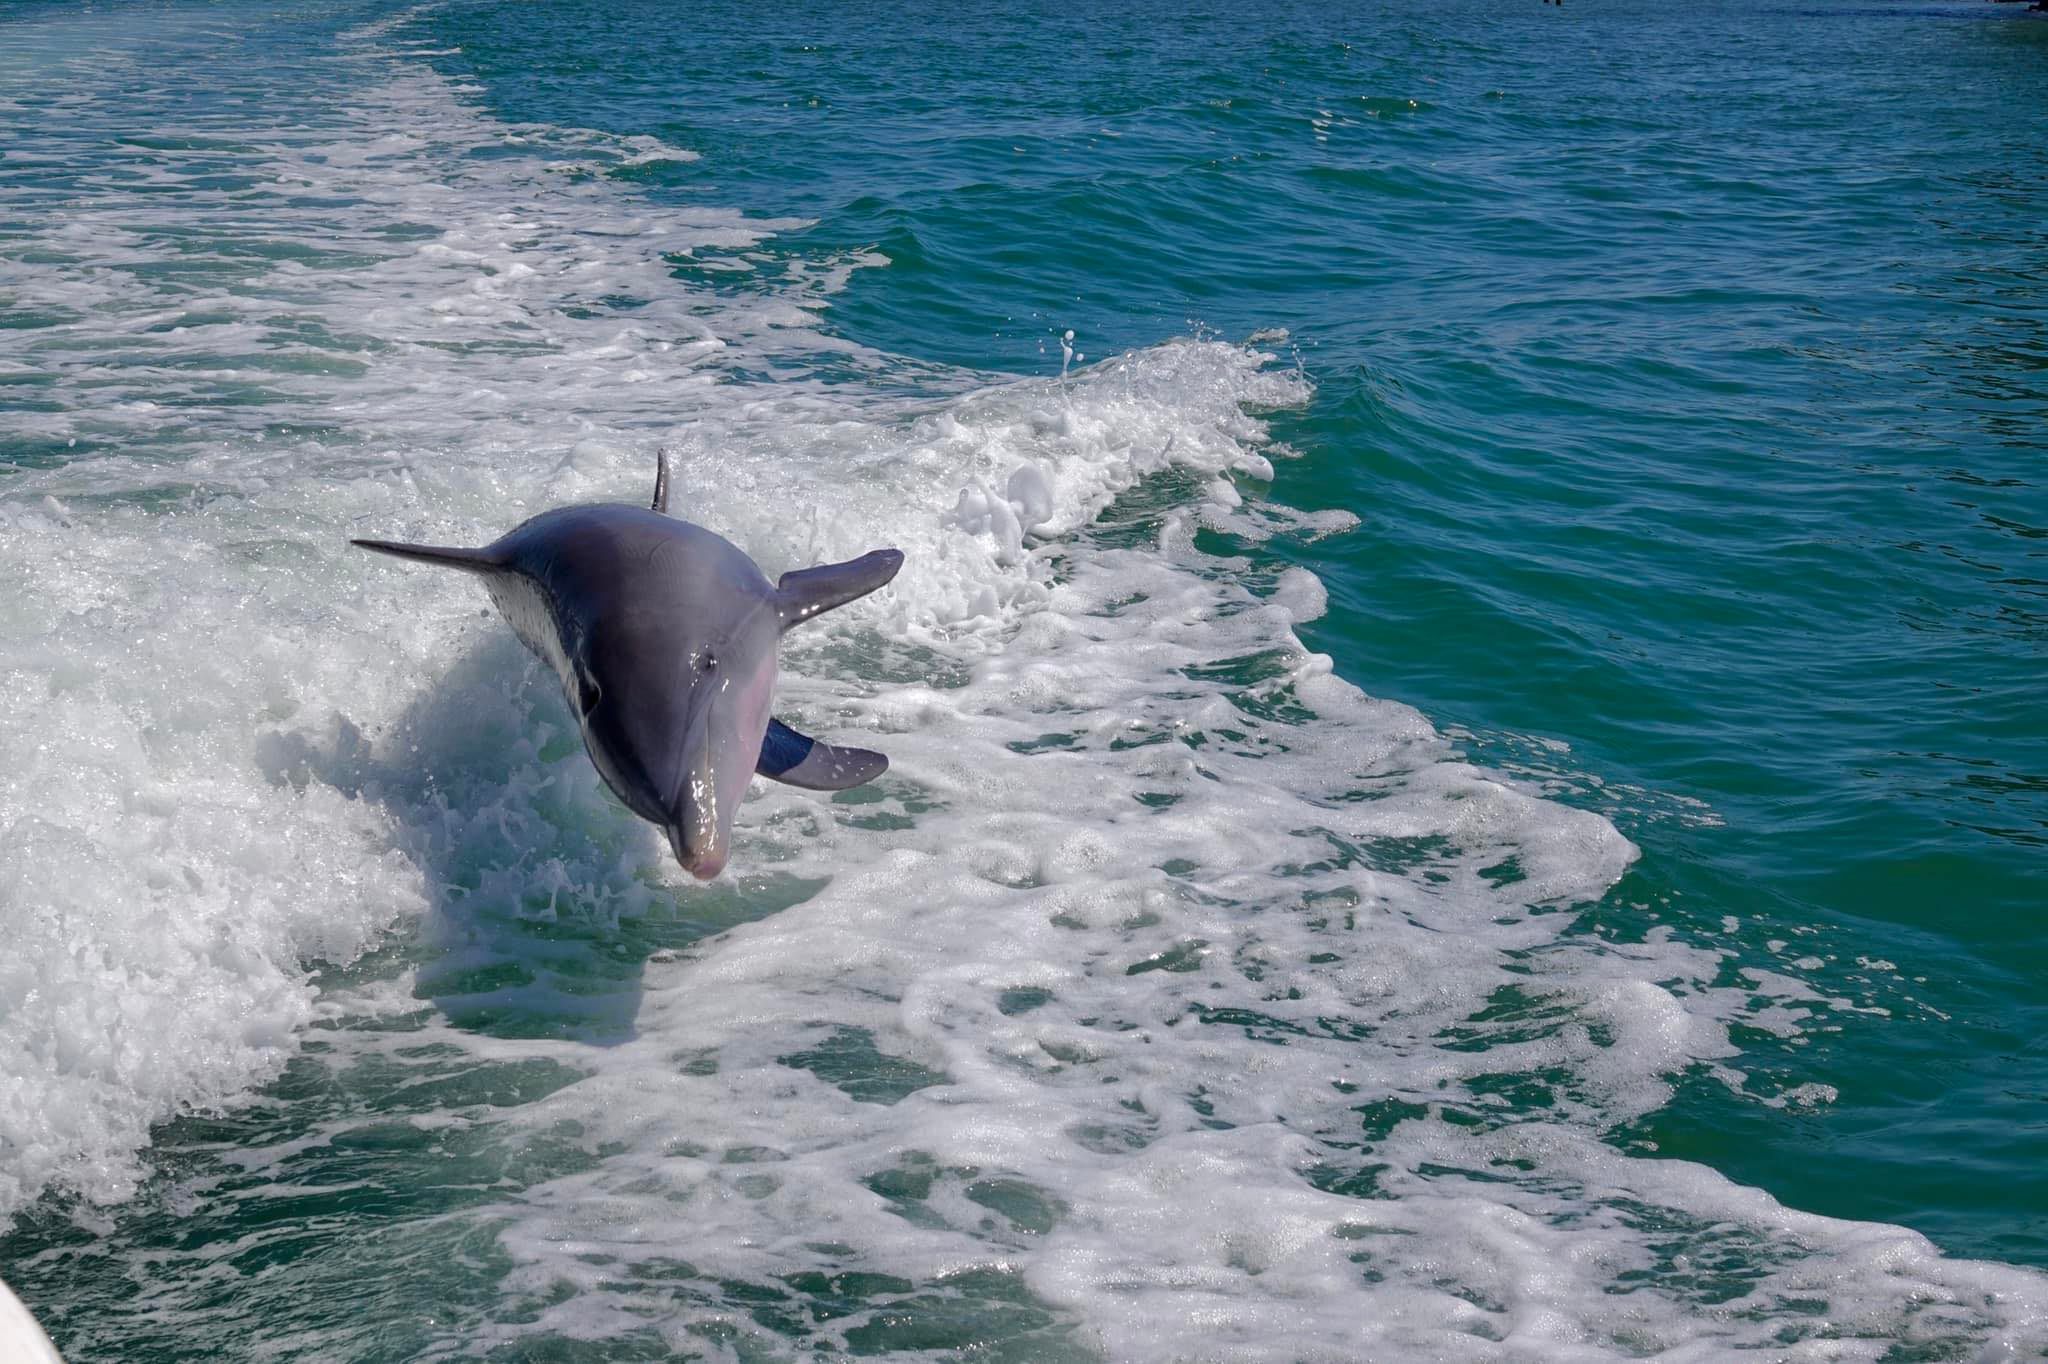 Dolphin Jumping in boat wake